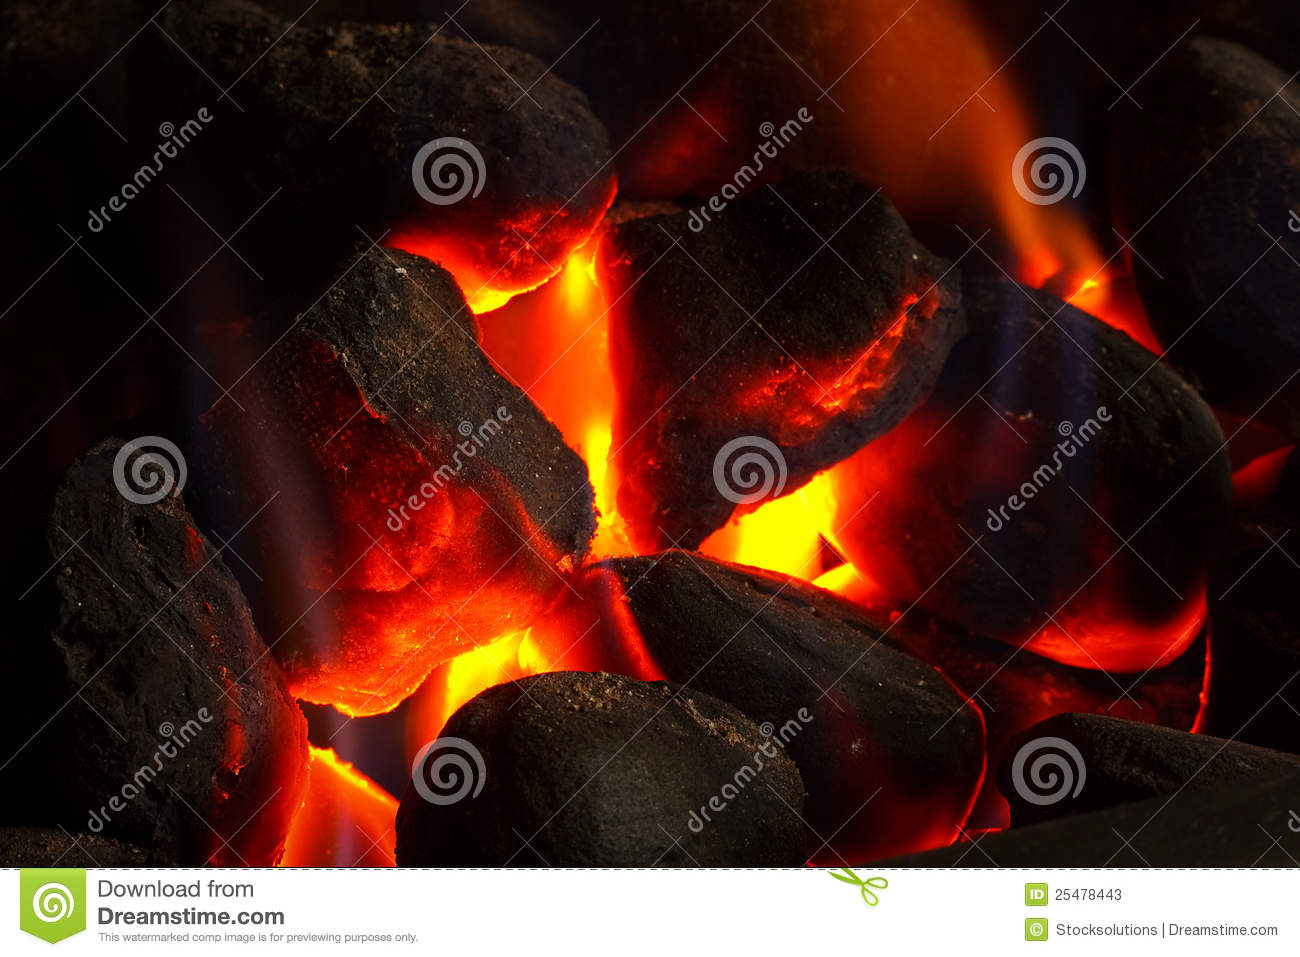 More Similar Stock Images Of   Imitation Coal Fire